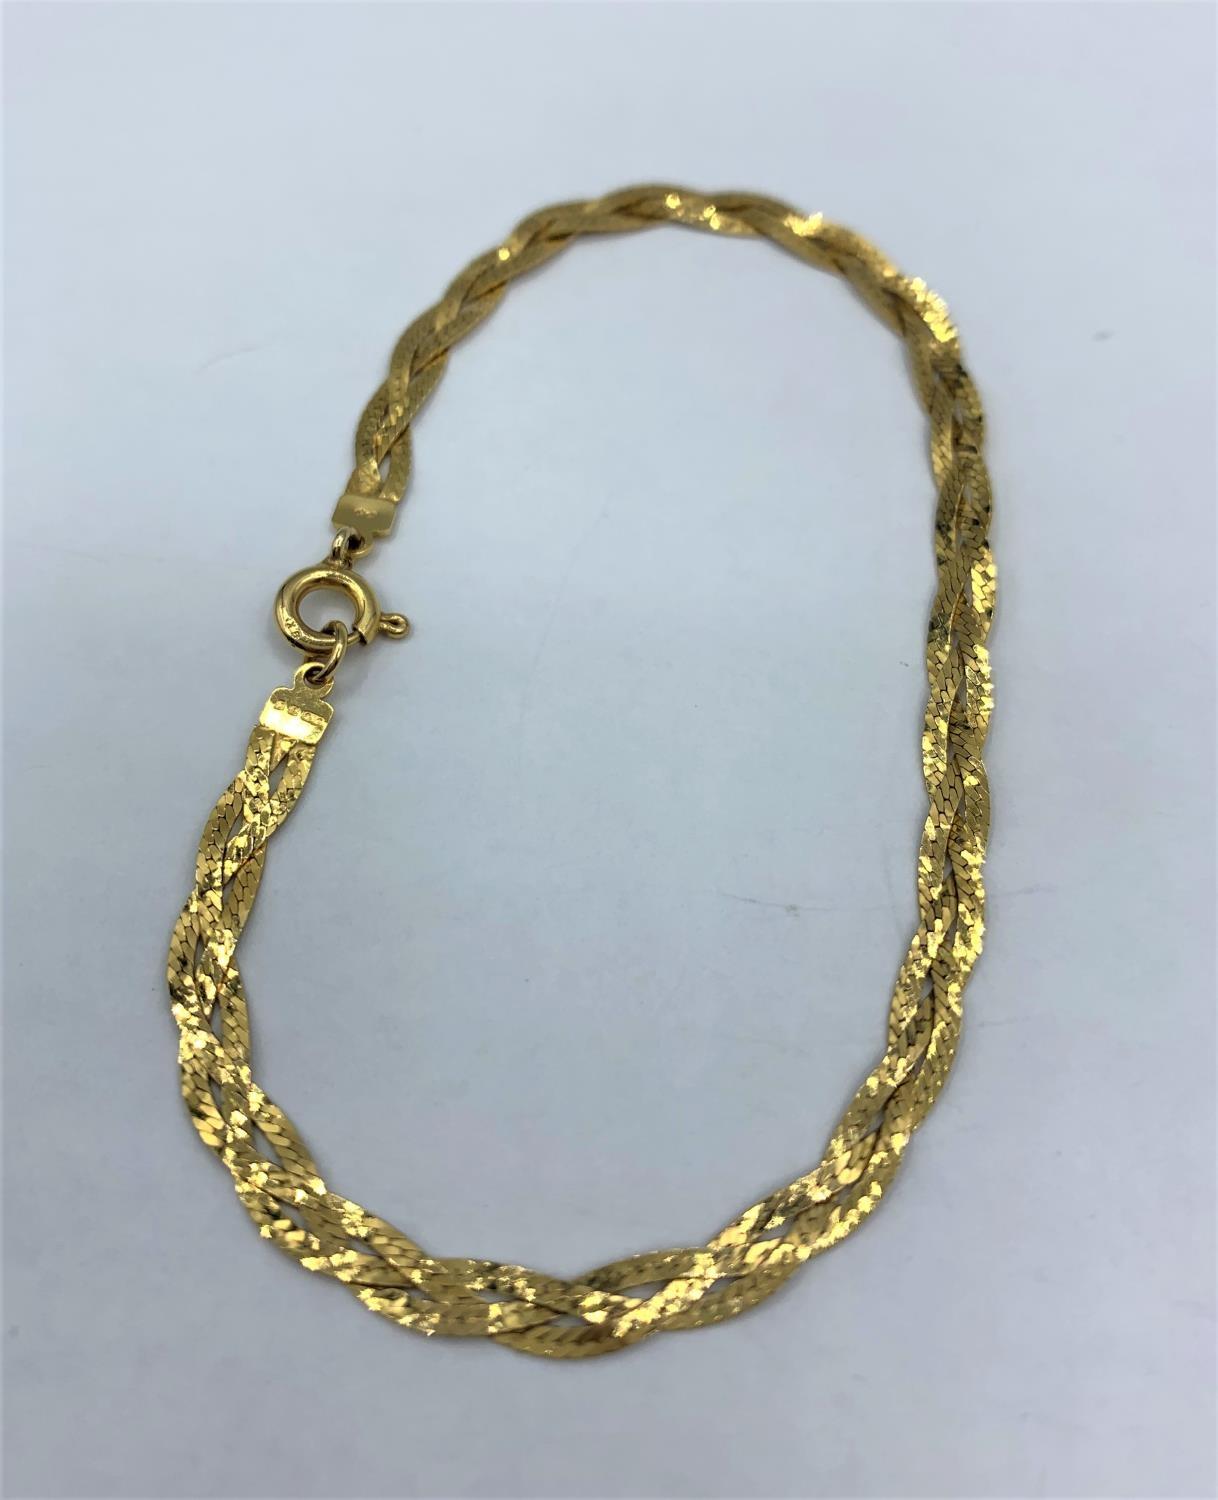 9ct yellow gold twist bracelet, weight 2.4g and 17cm long - Image 2 of 4